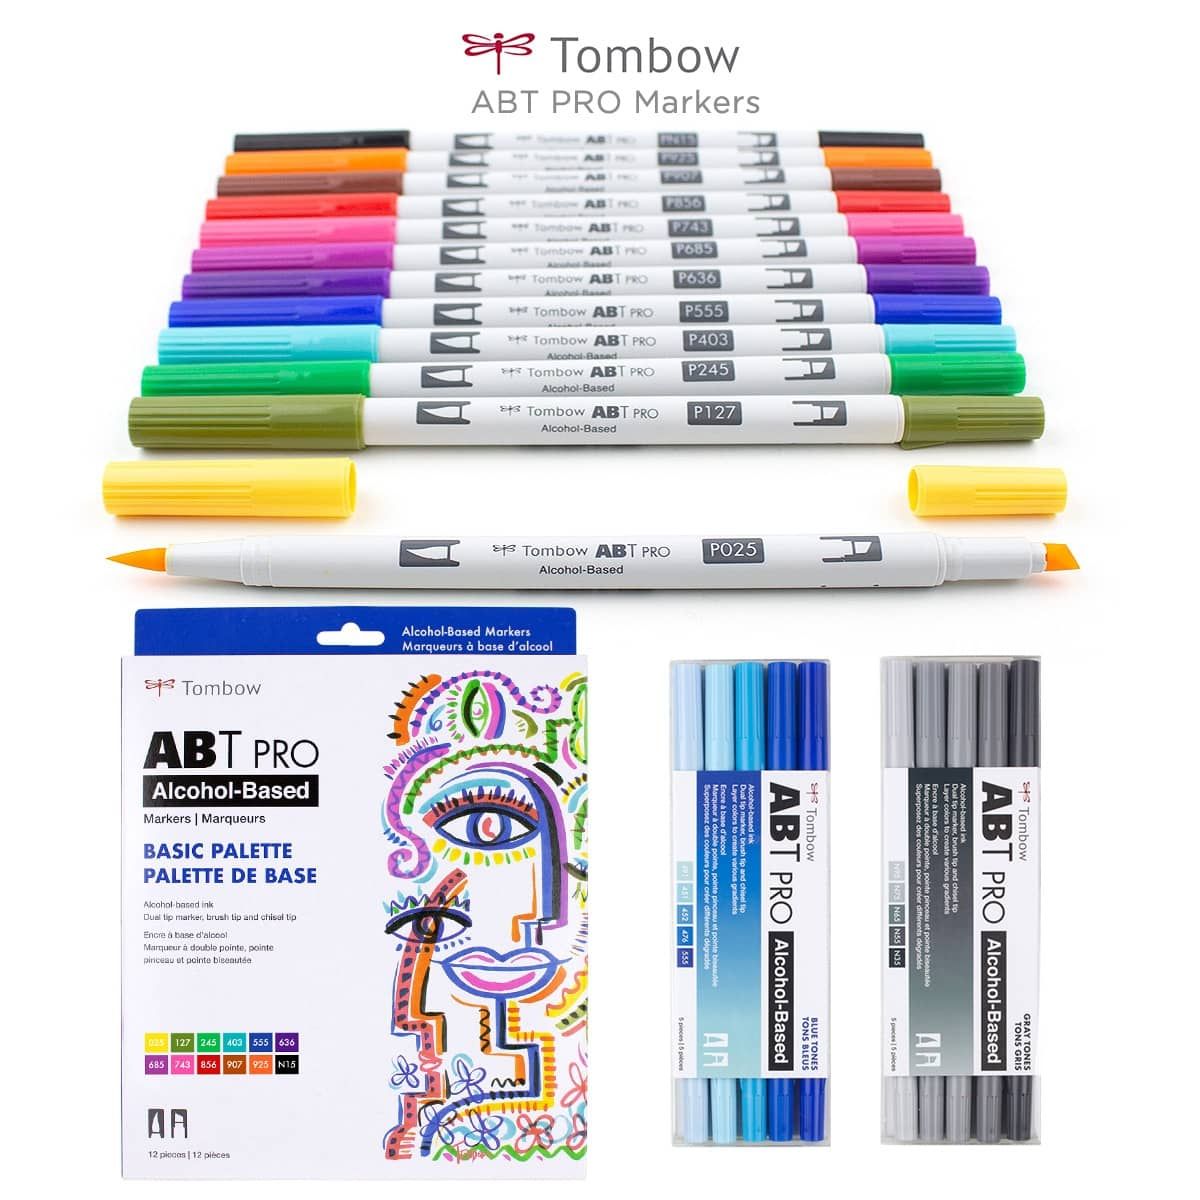 Coloring Resin with ABT PRO Alcohol-Based Markers - Tombow USA Blog